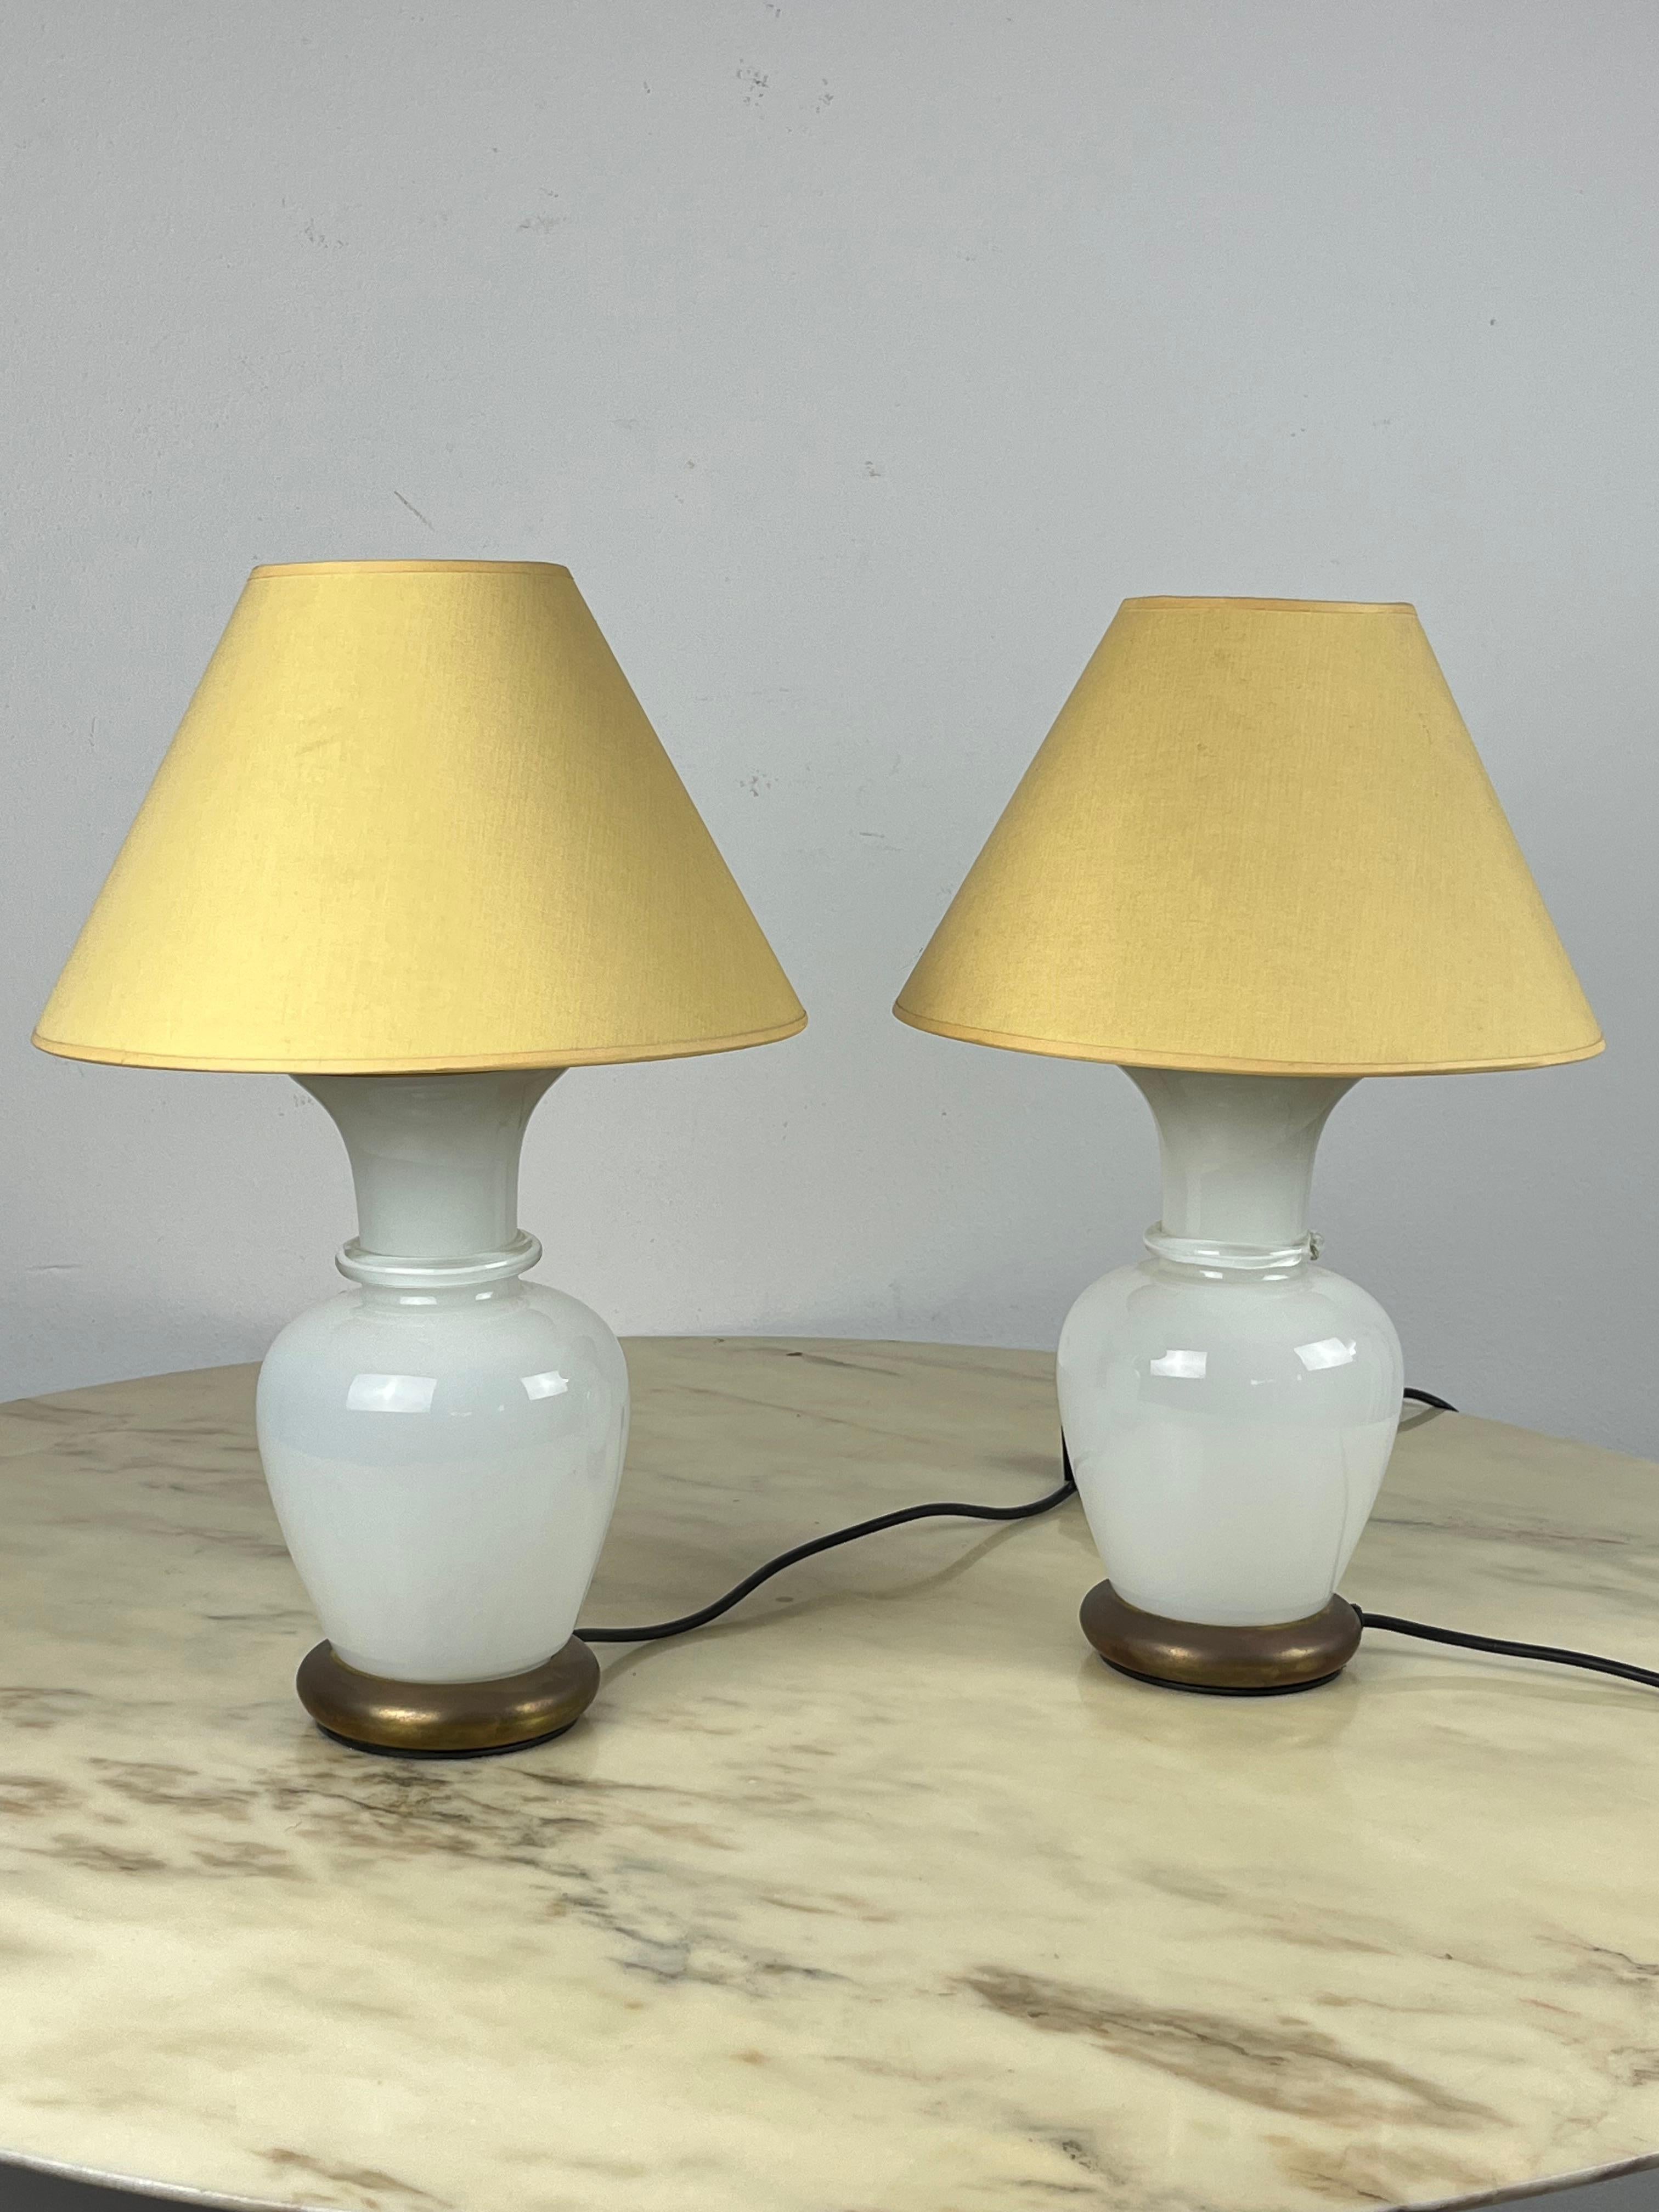 Set of 3 Murano Glass and Brass Table Lamps, F. Fabbian, Italy, 1970s For Sale 3